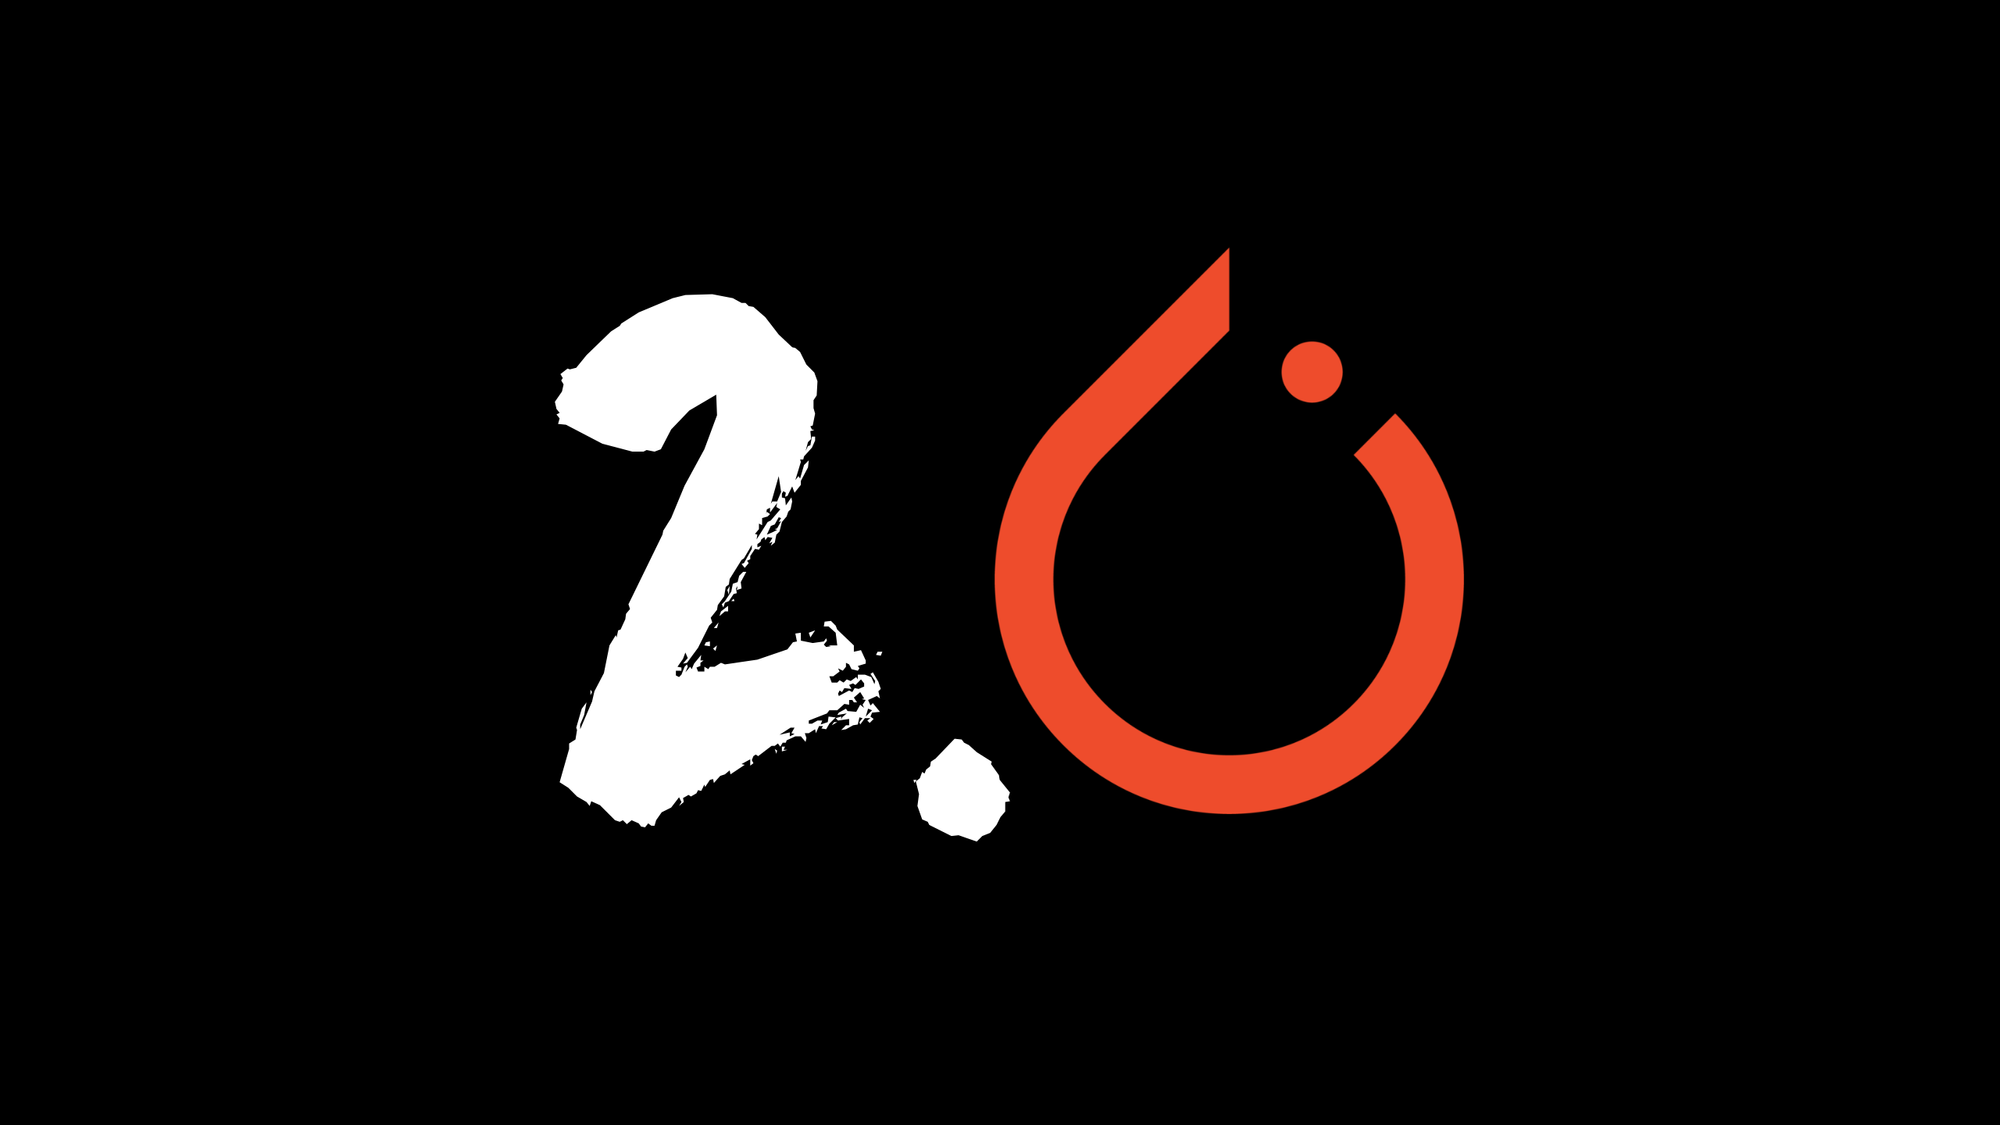 PyTorch 2.0 with 2 as text and PyTorch logo as 0